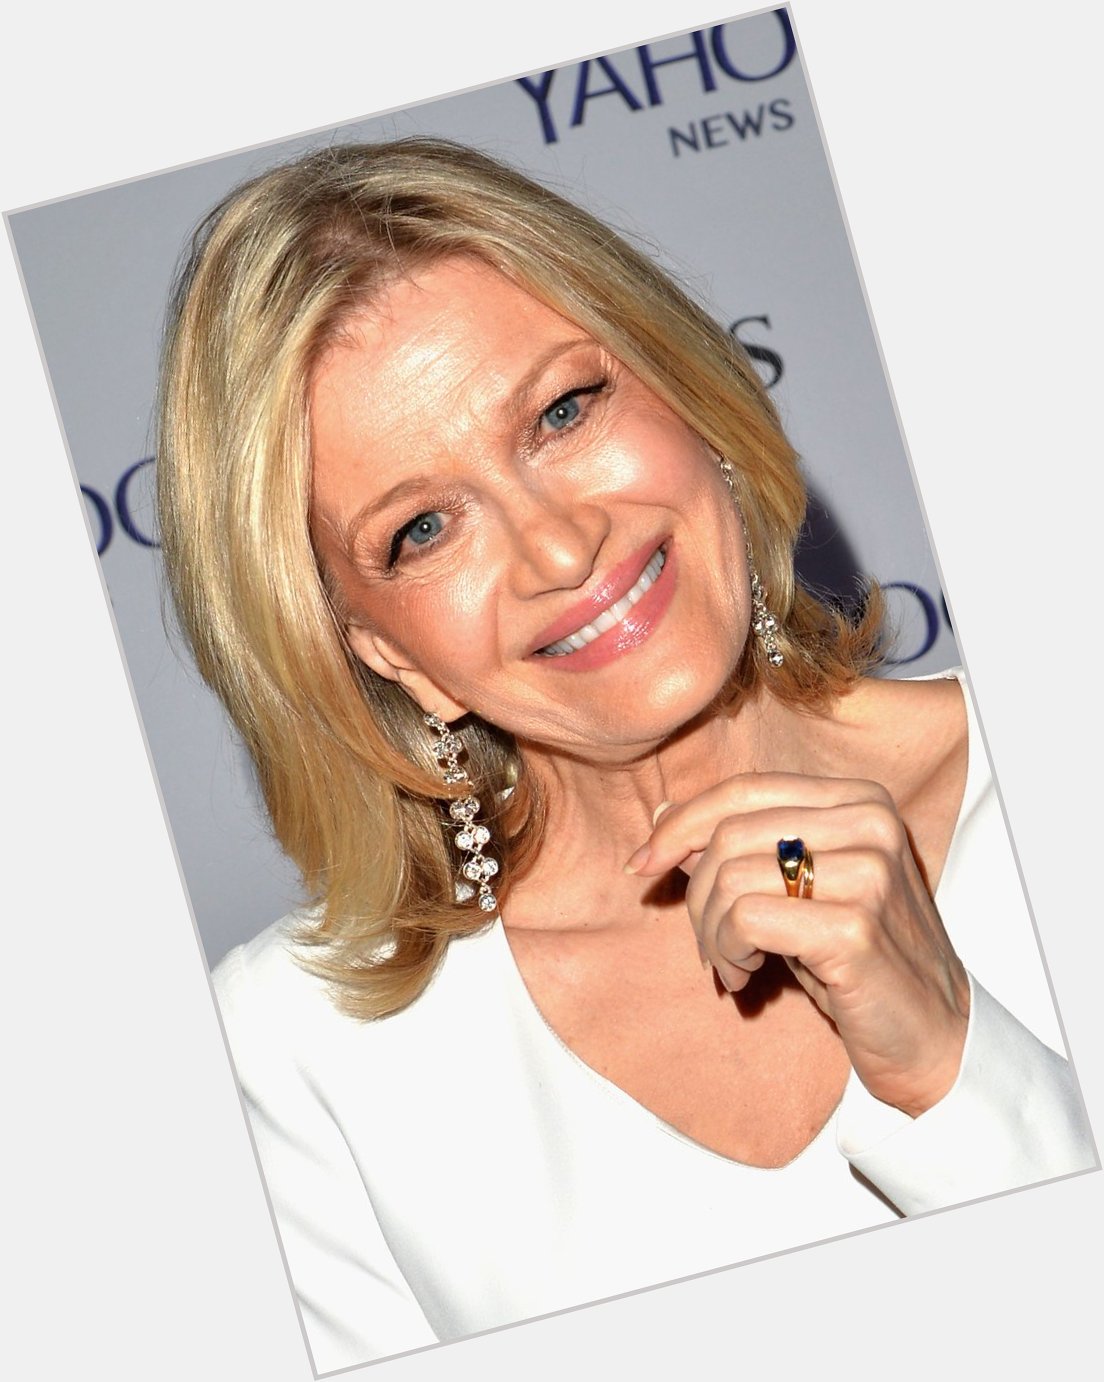 Happy 77th birthday to and famous journalist Diane Sawyer! 